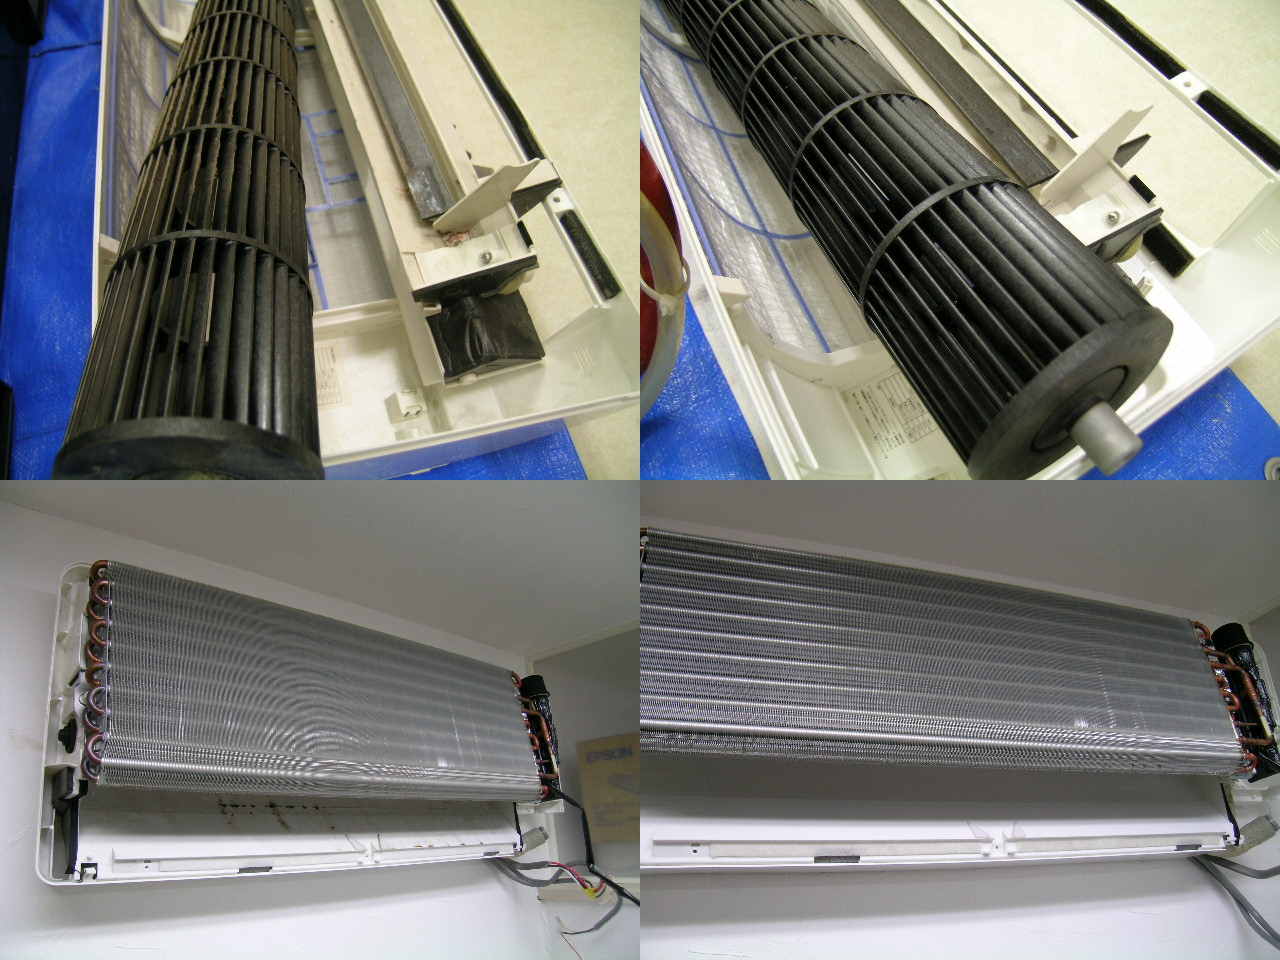 http://ajras.net/images/111526-aircon.jpg